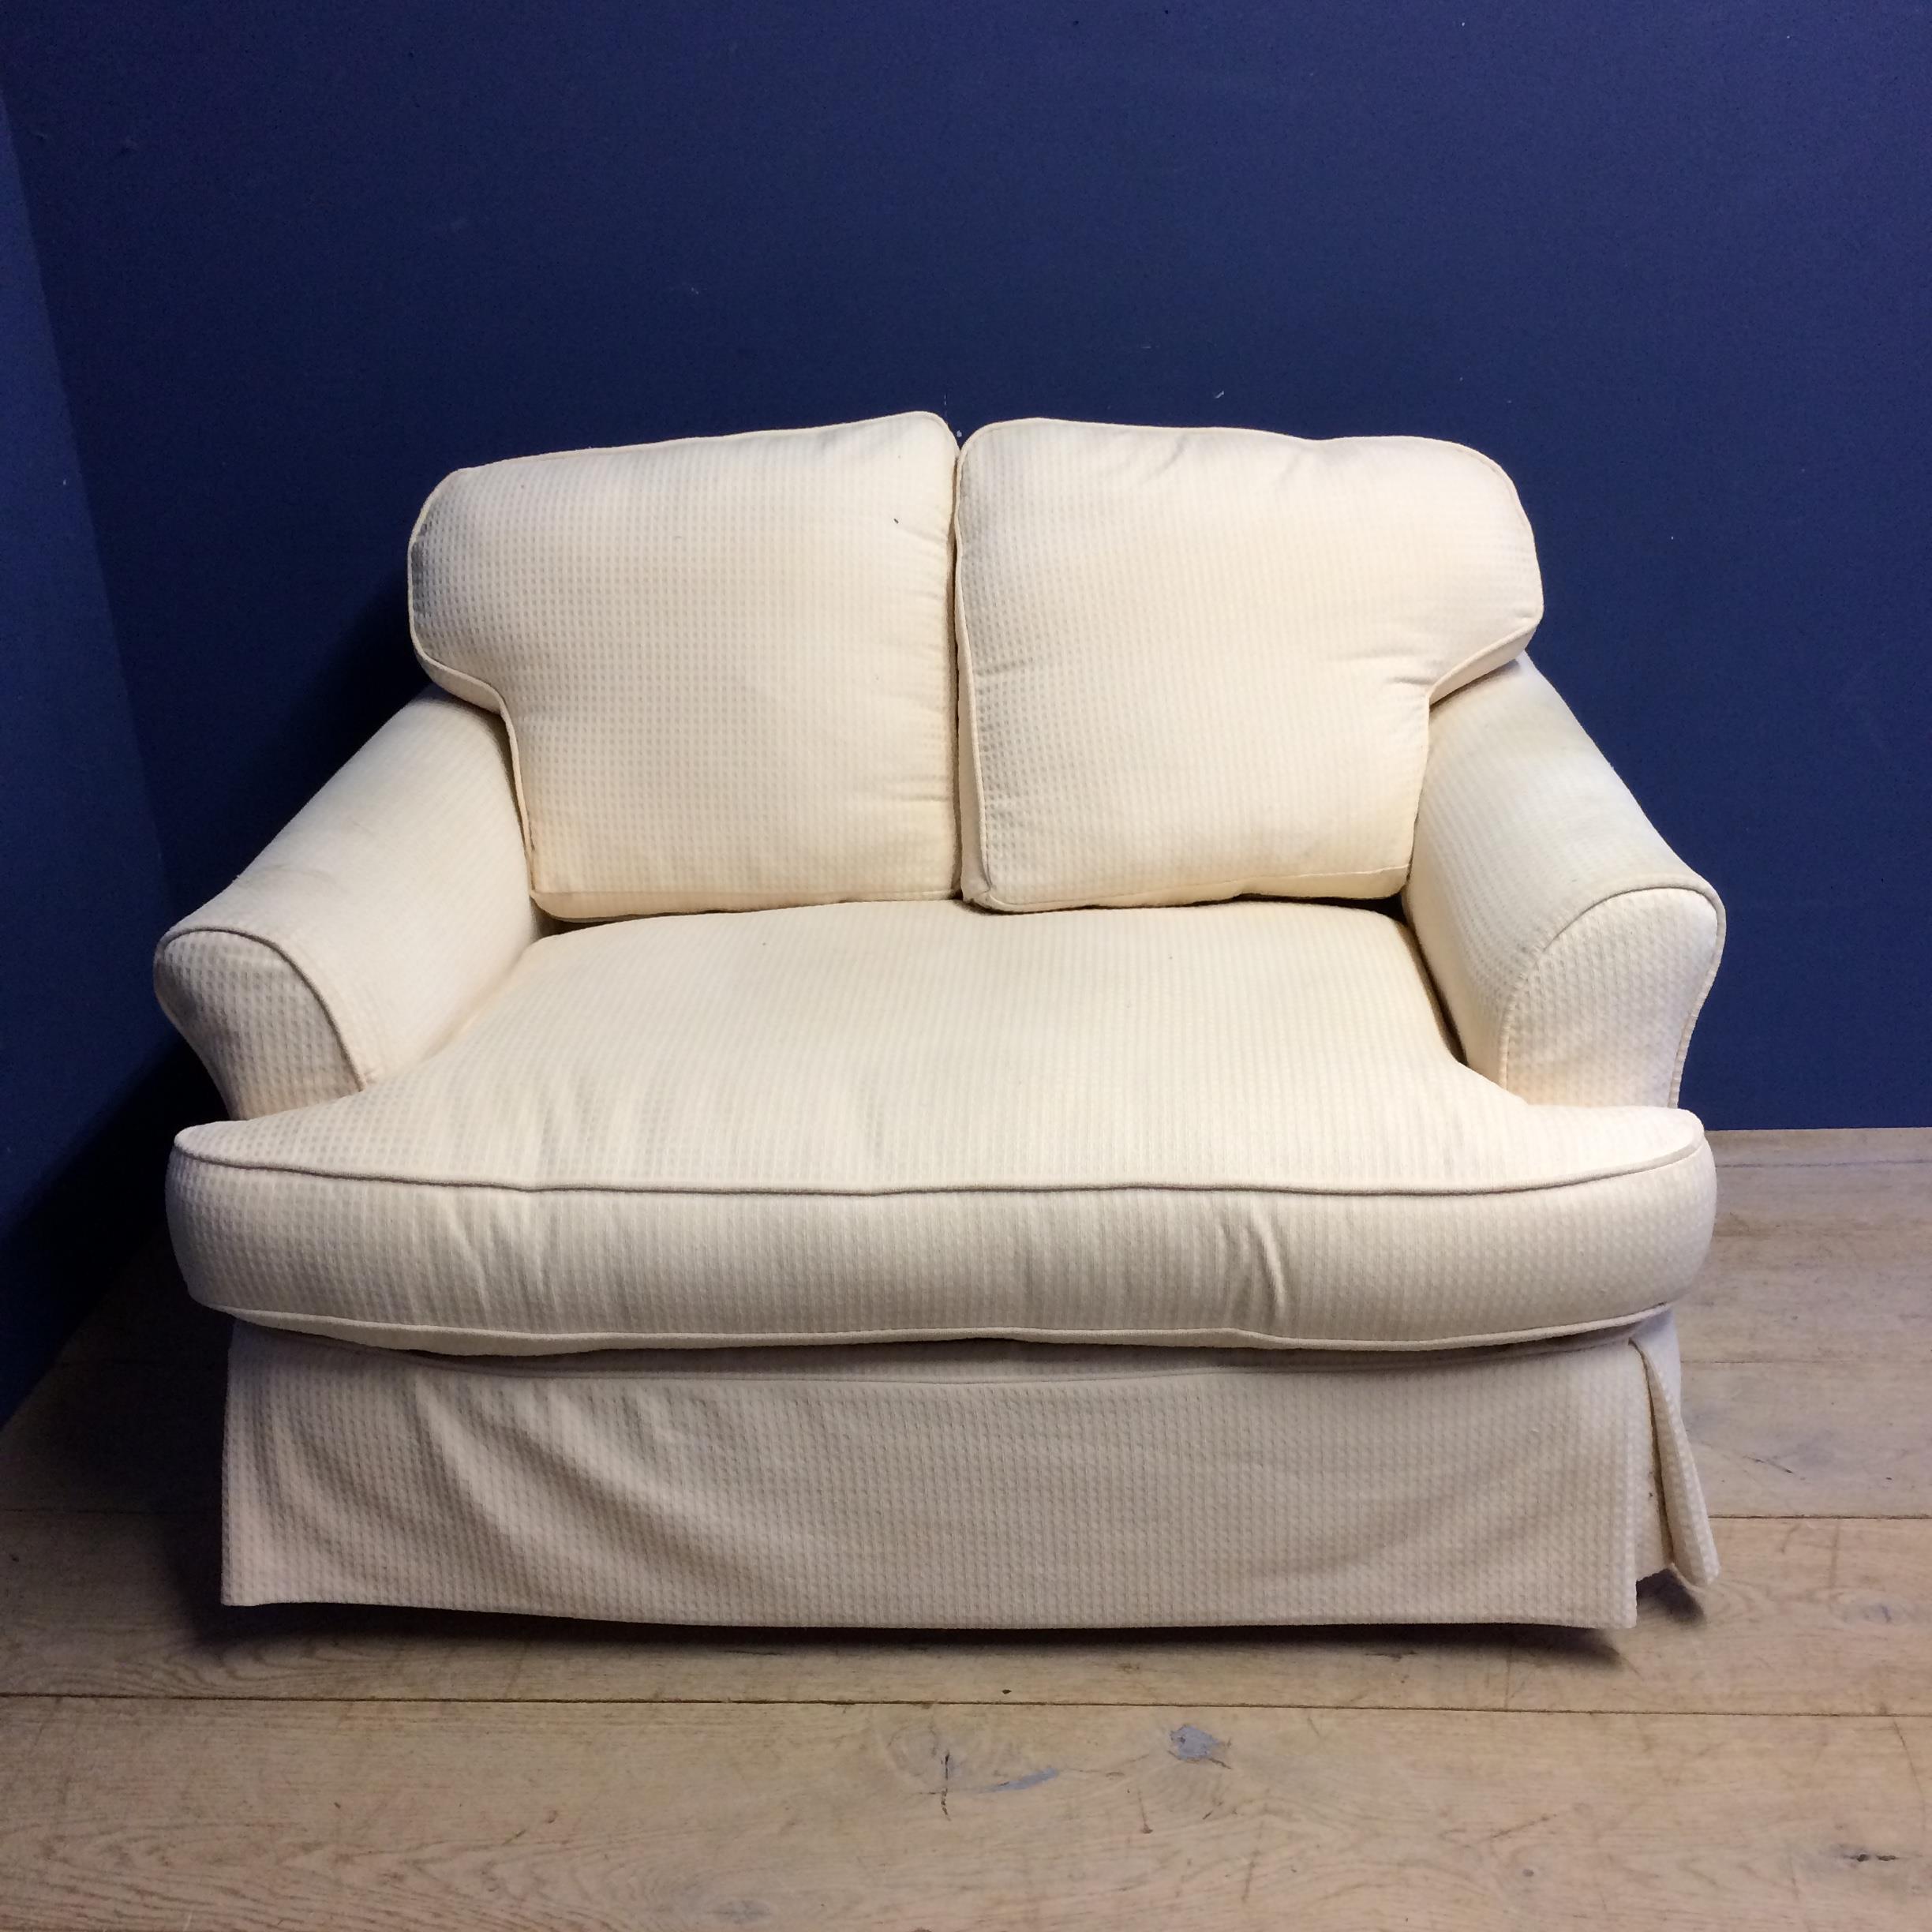 Sofa bed, upholstered in cream fabric (in used condition -ie upholstery needs some cleaning)